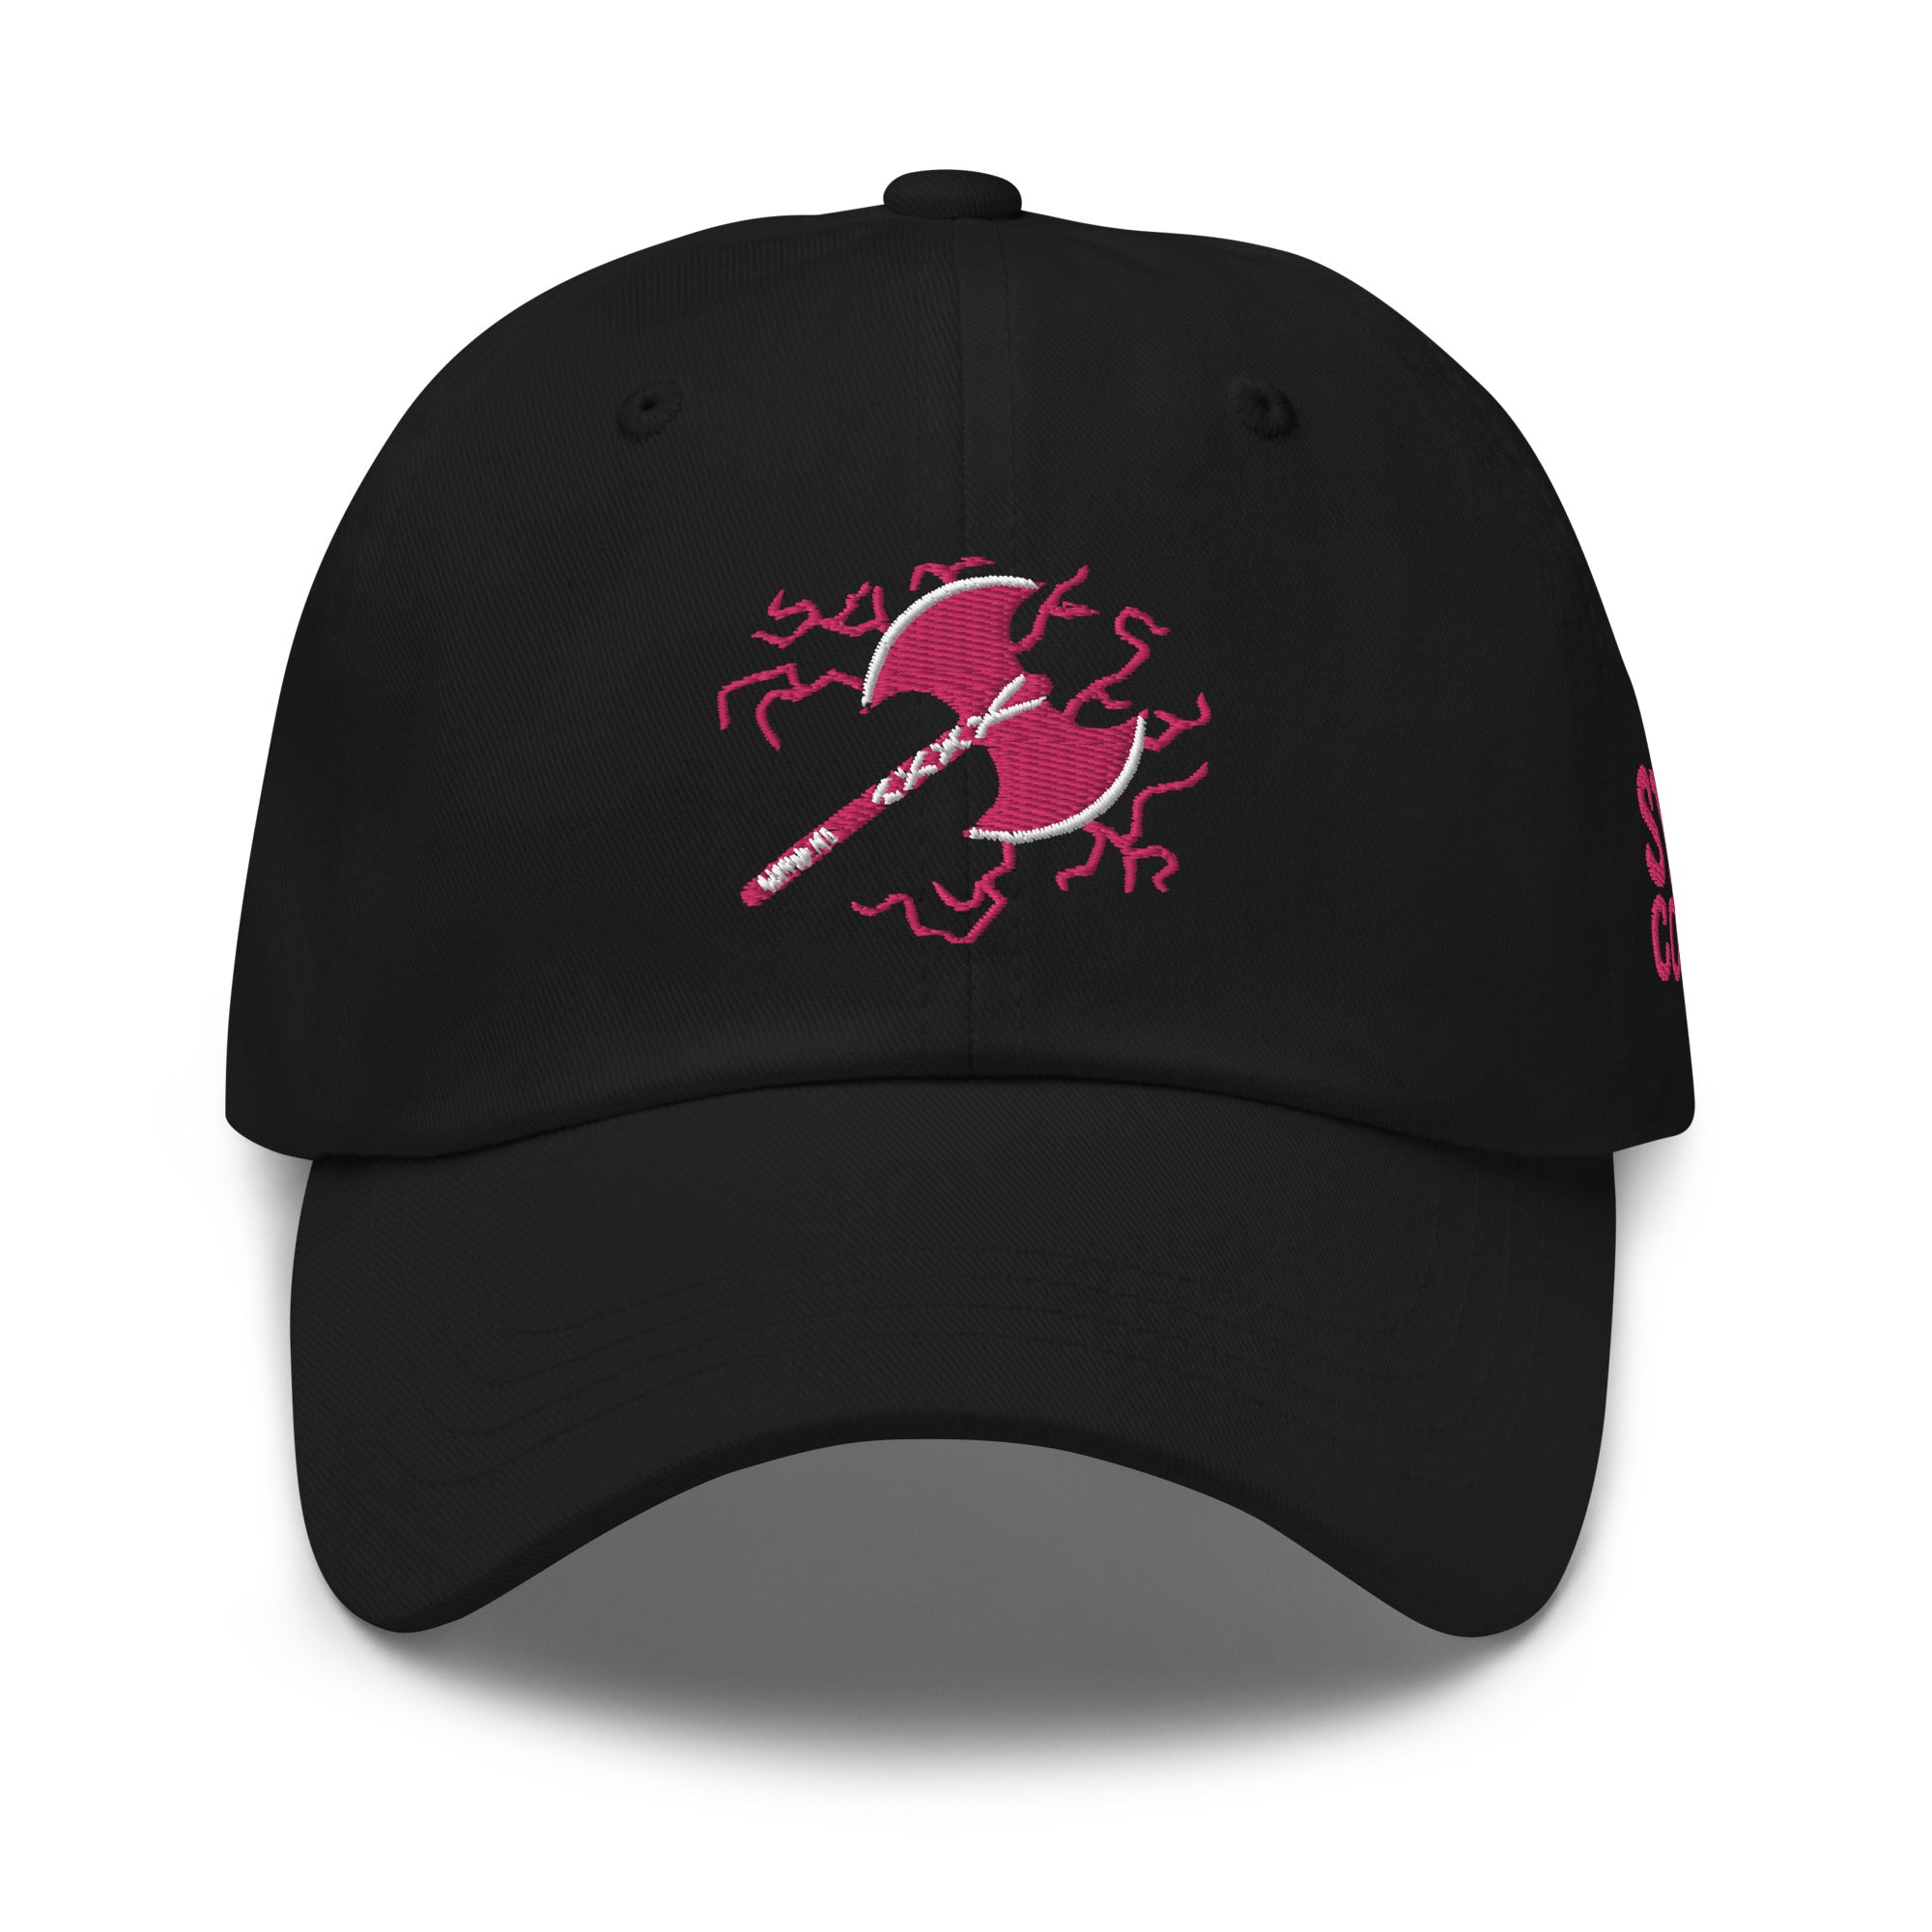 Storm Company in pink Dad hat